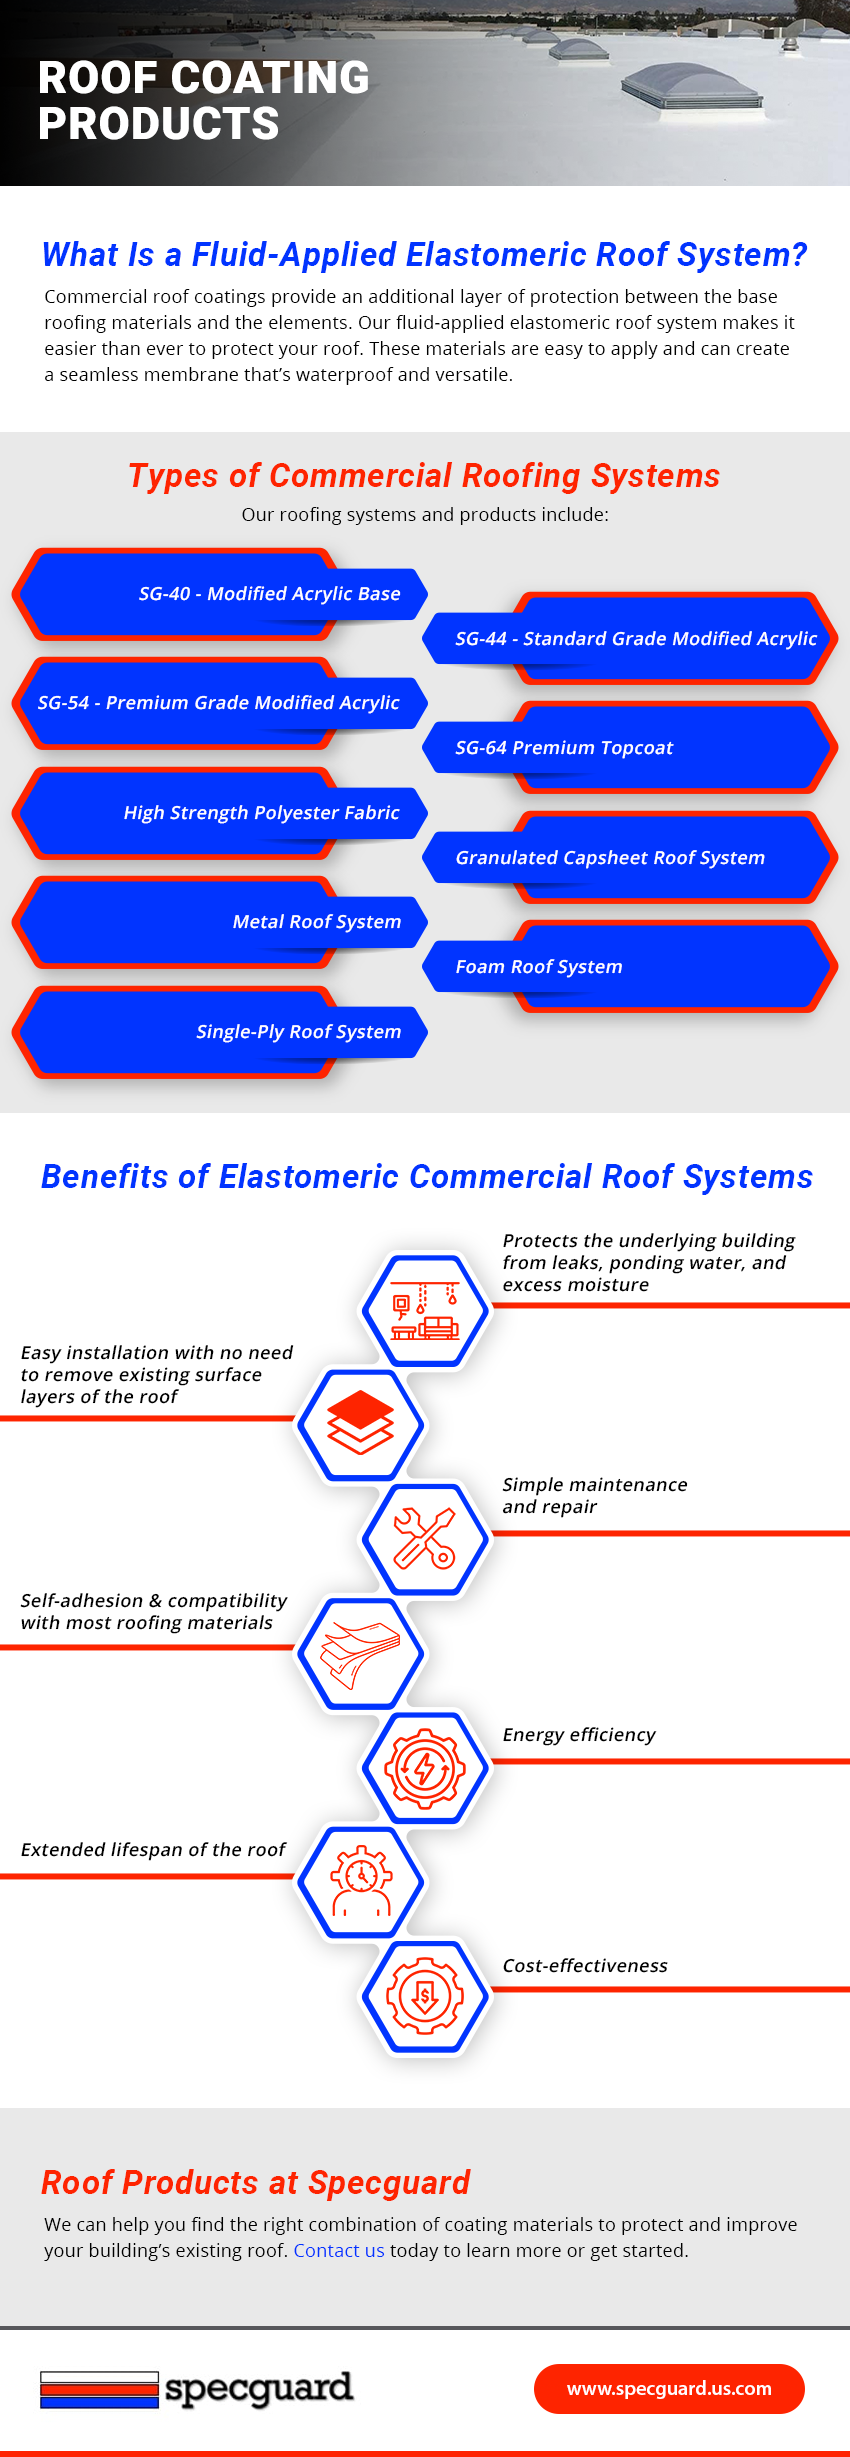 Roof Coating Products” data-lazy-src=